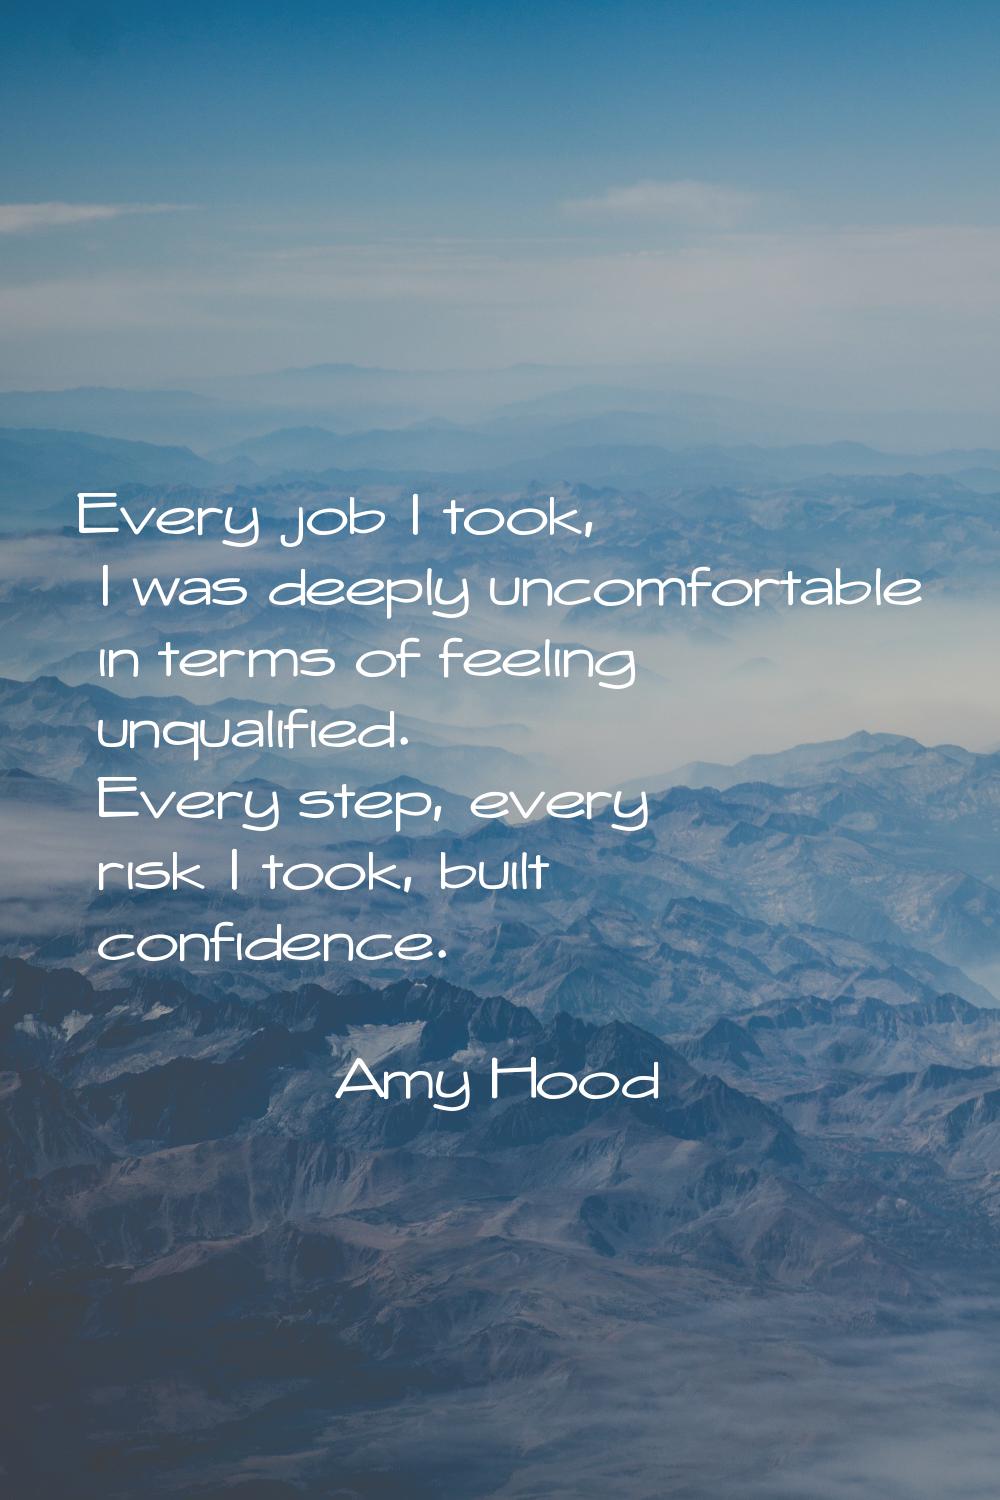 Every job I took, I was deeply uncomfortable in terms of feeling unqualified. Every step, every ris